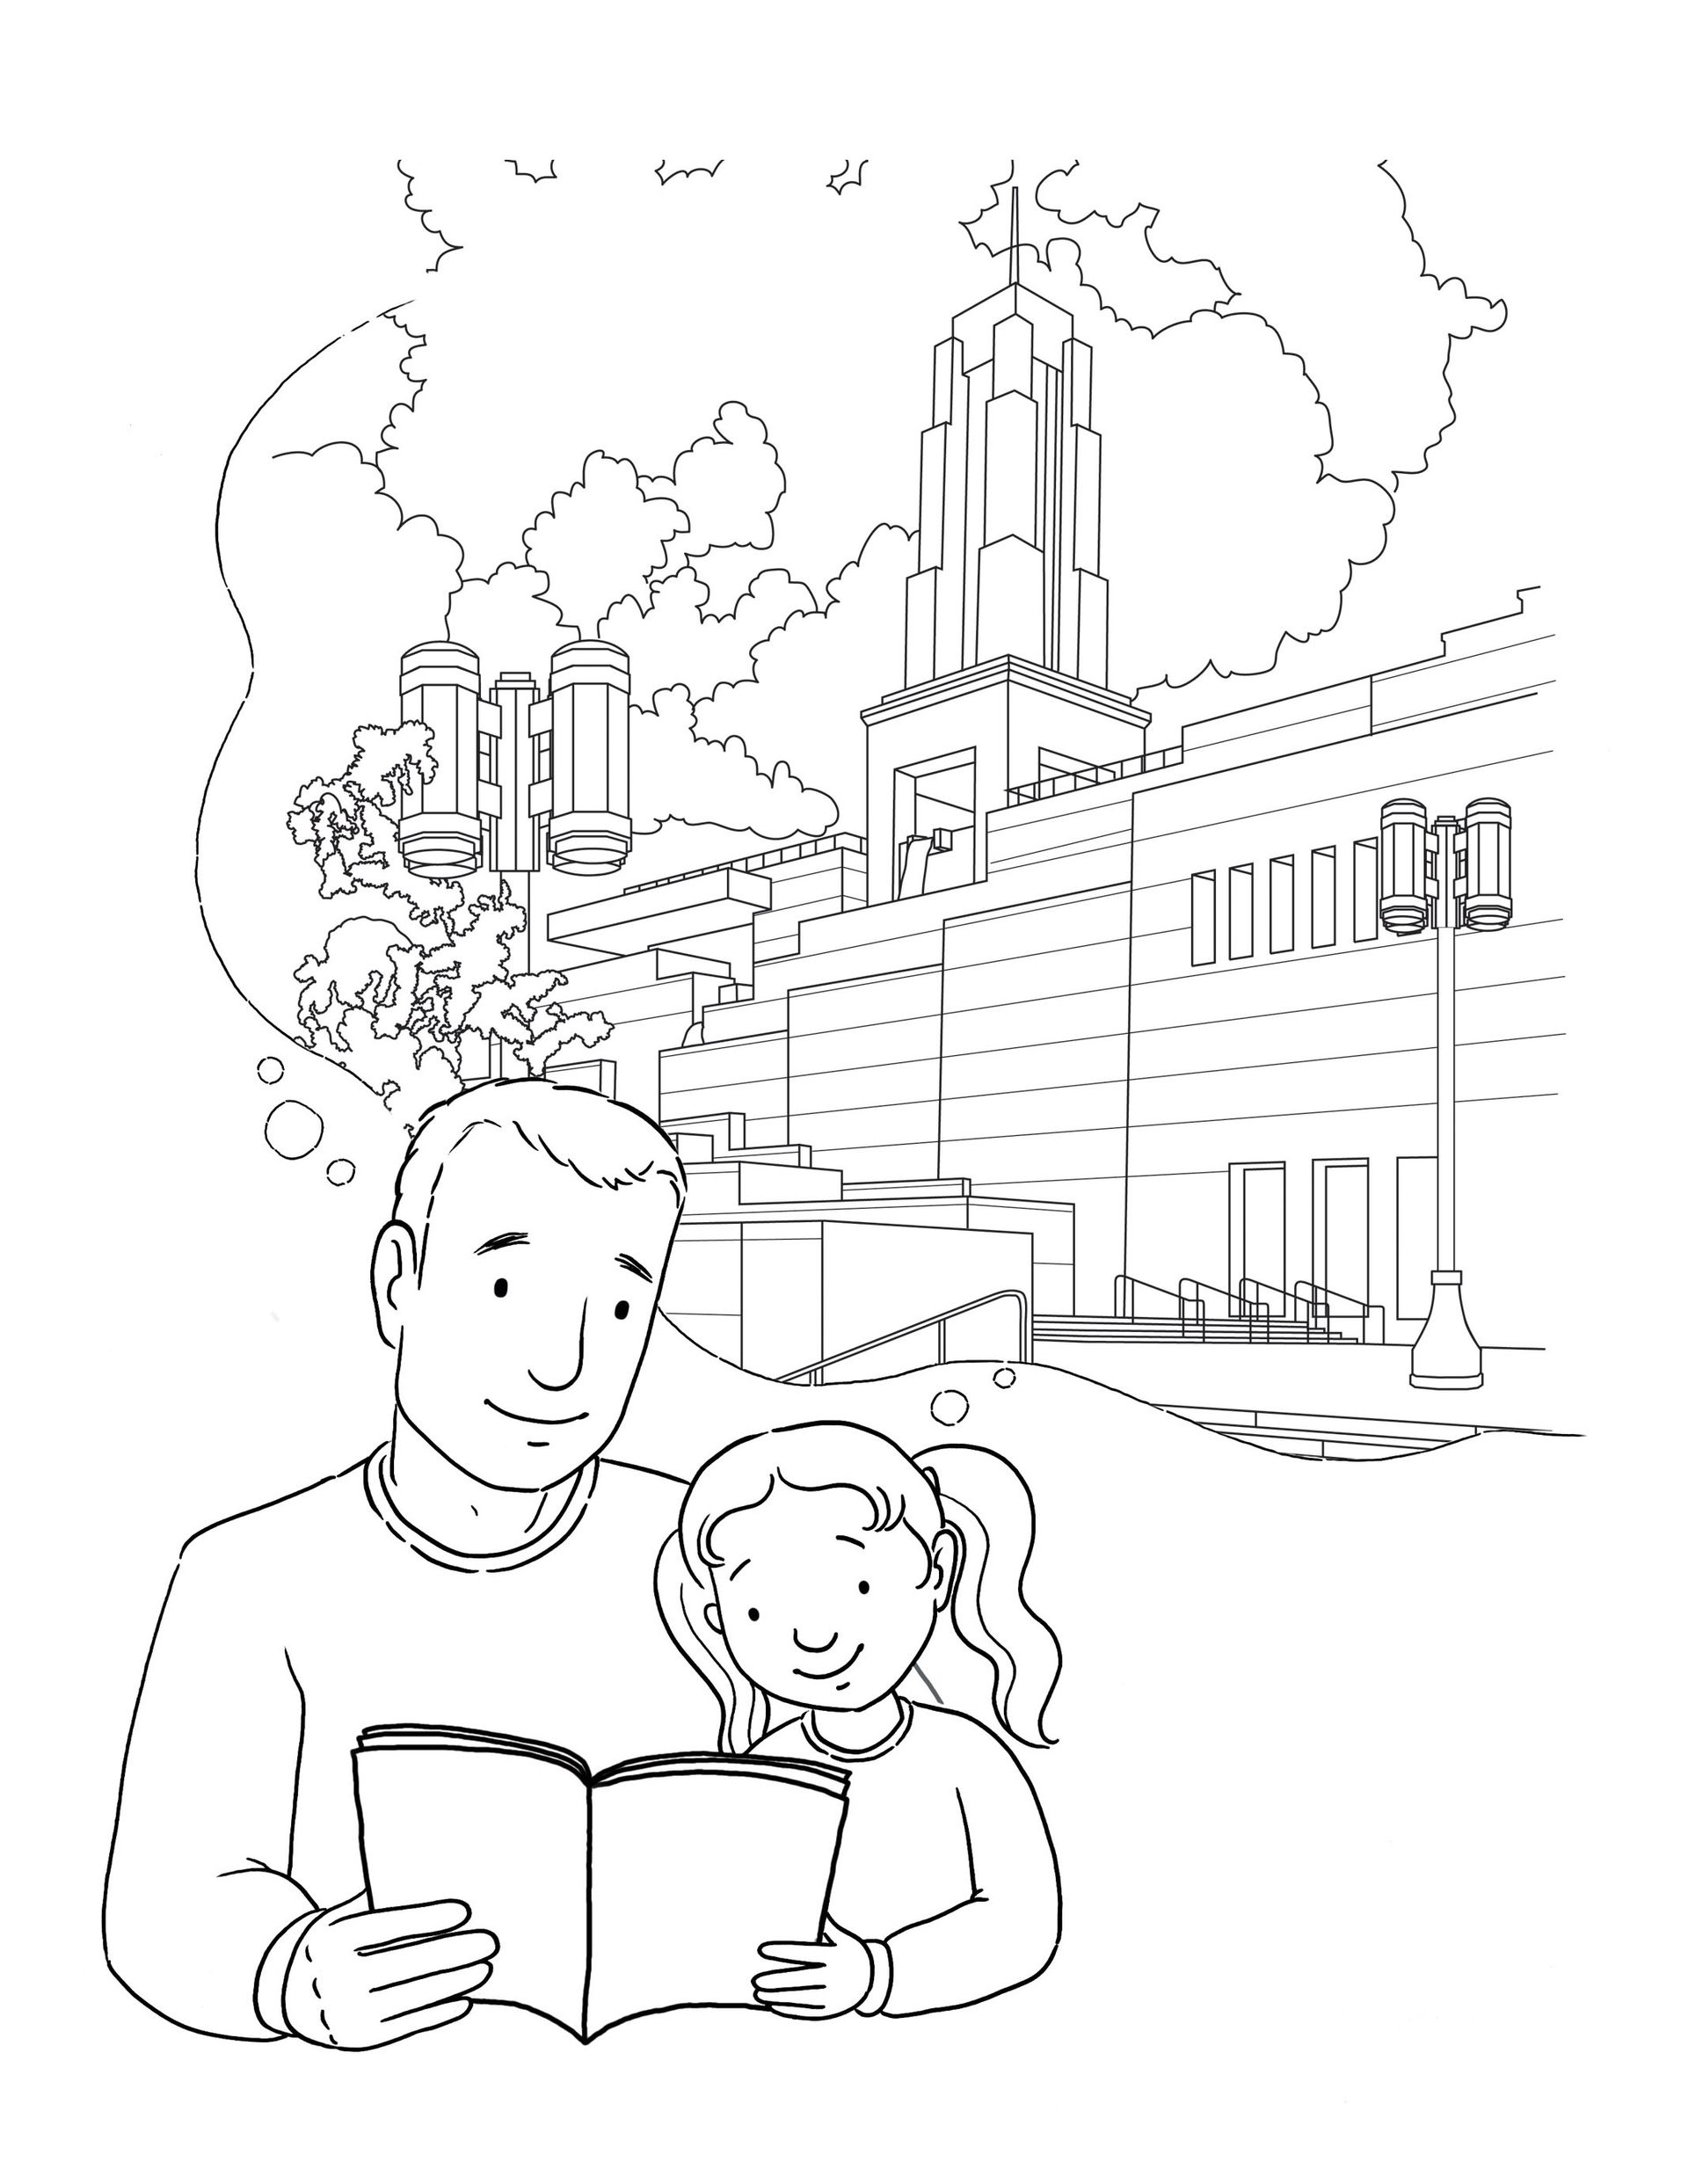 A father and daughter read from a Church magazine and think about the Conference Center in Salt Lake City, Utah.